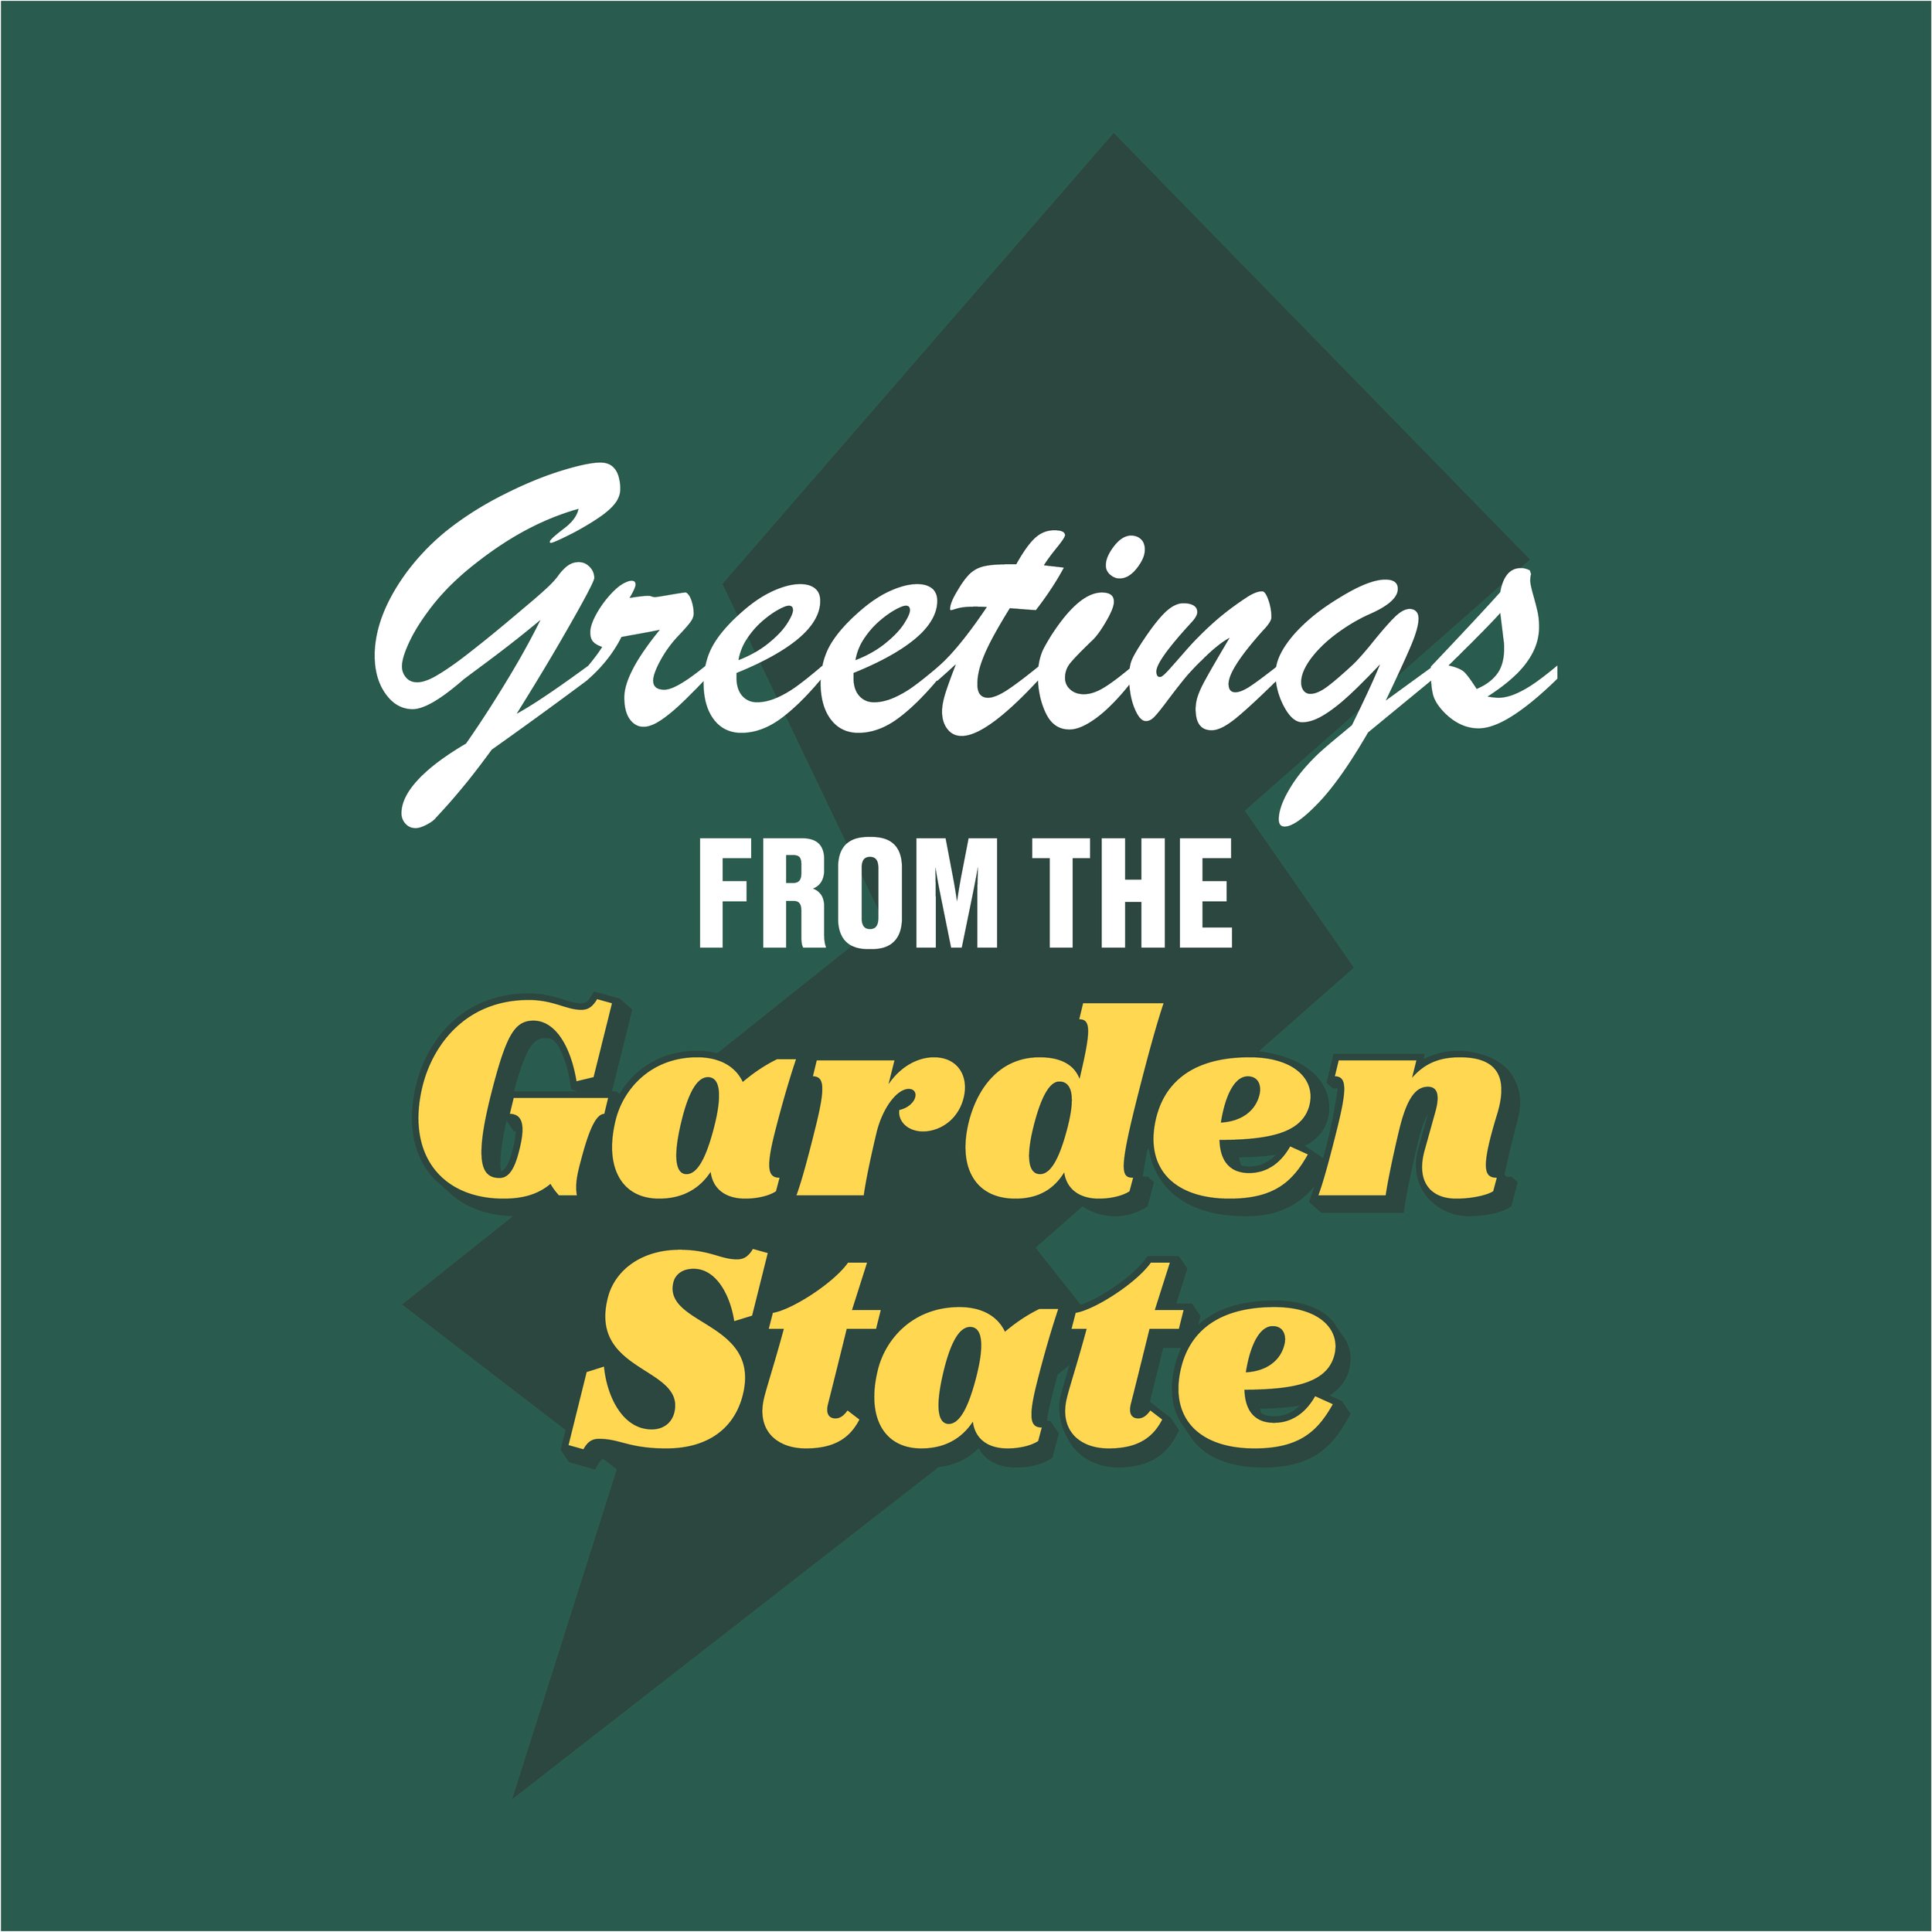 Greeting From The Garden State & NJ Overlay @4x-100.jpg